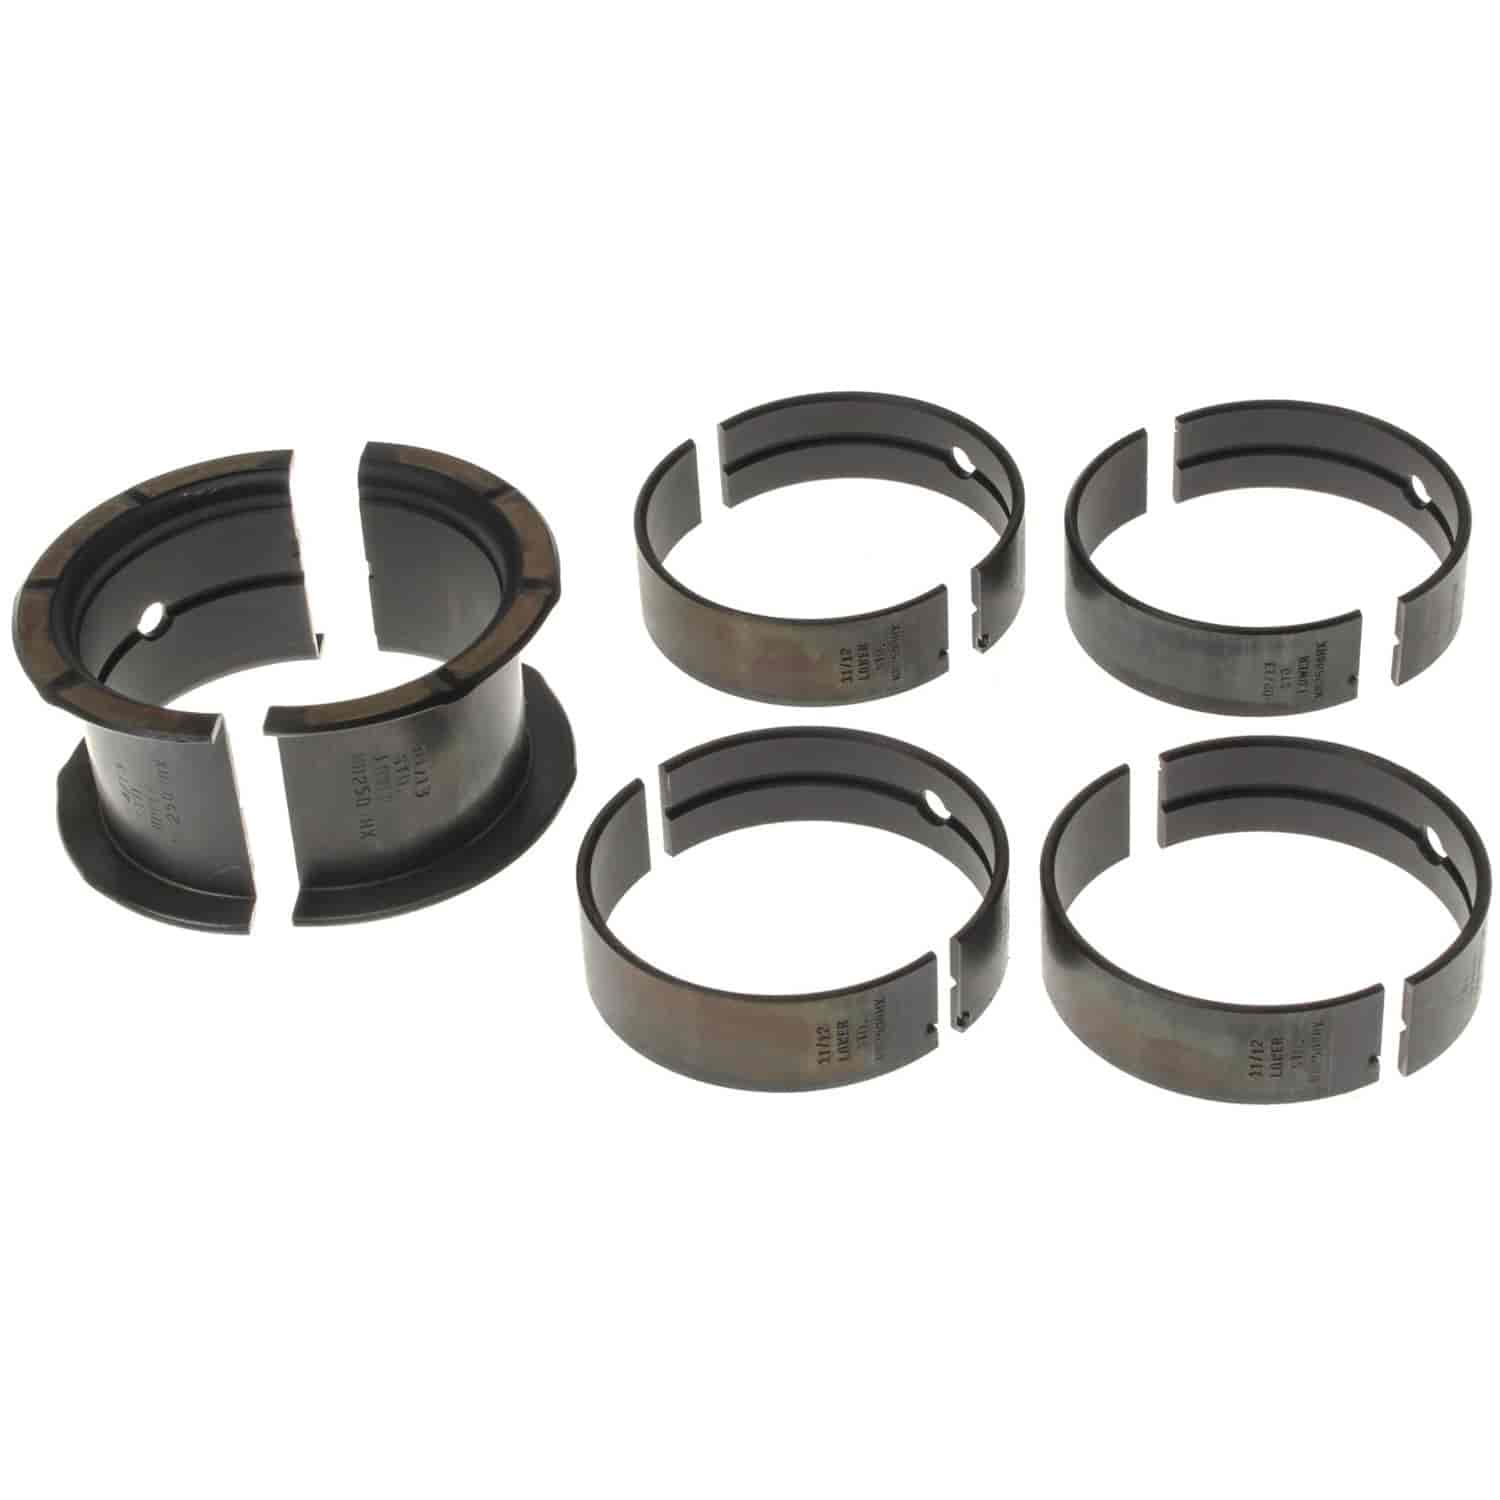 Main Bearing Set Chevy 1968-2002 V8 262/267/302/305/307/327/350 with Standard Size